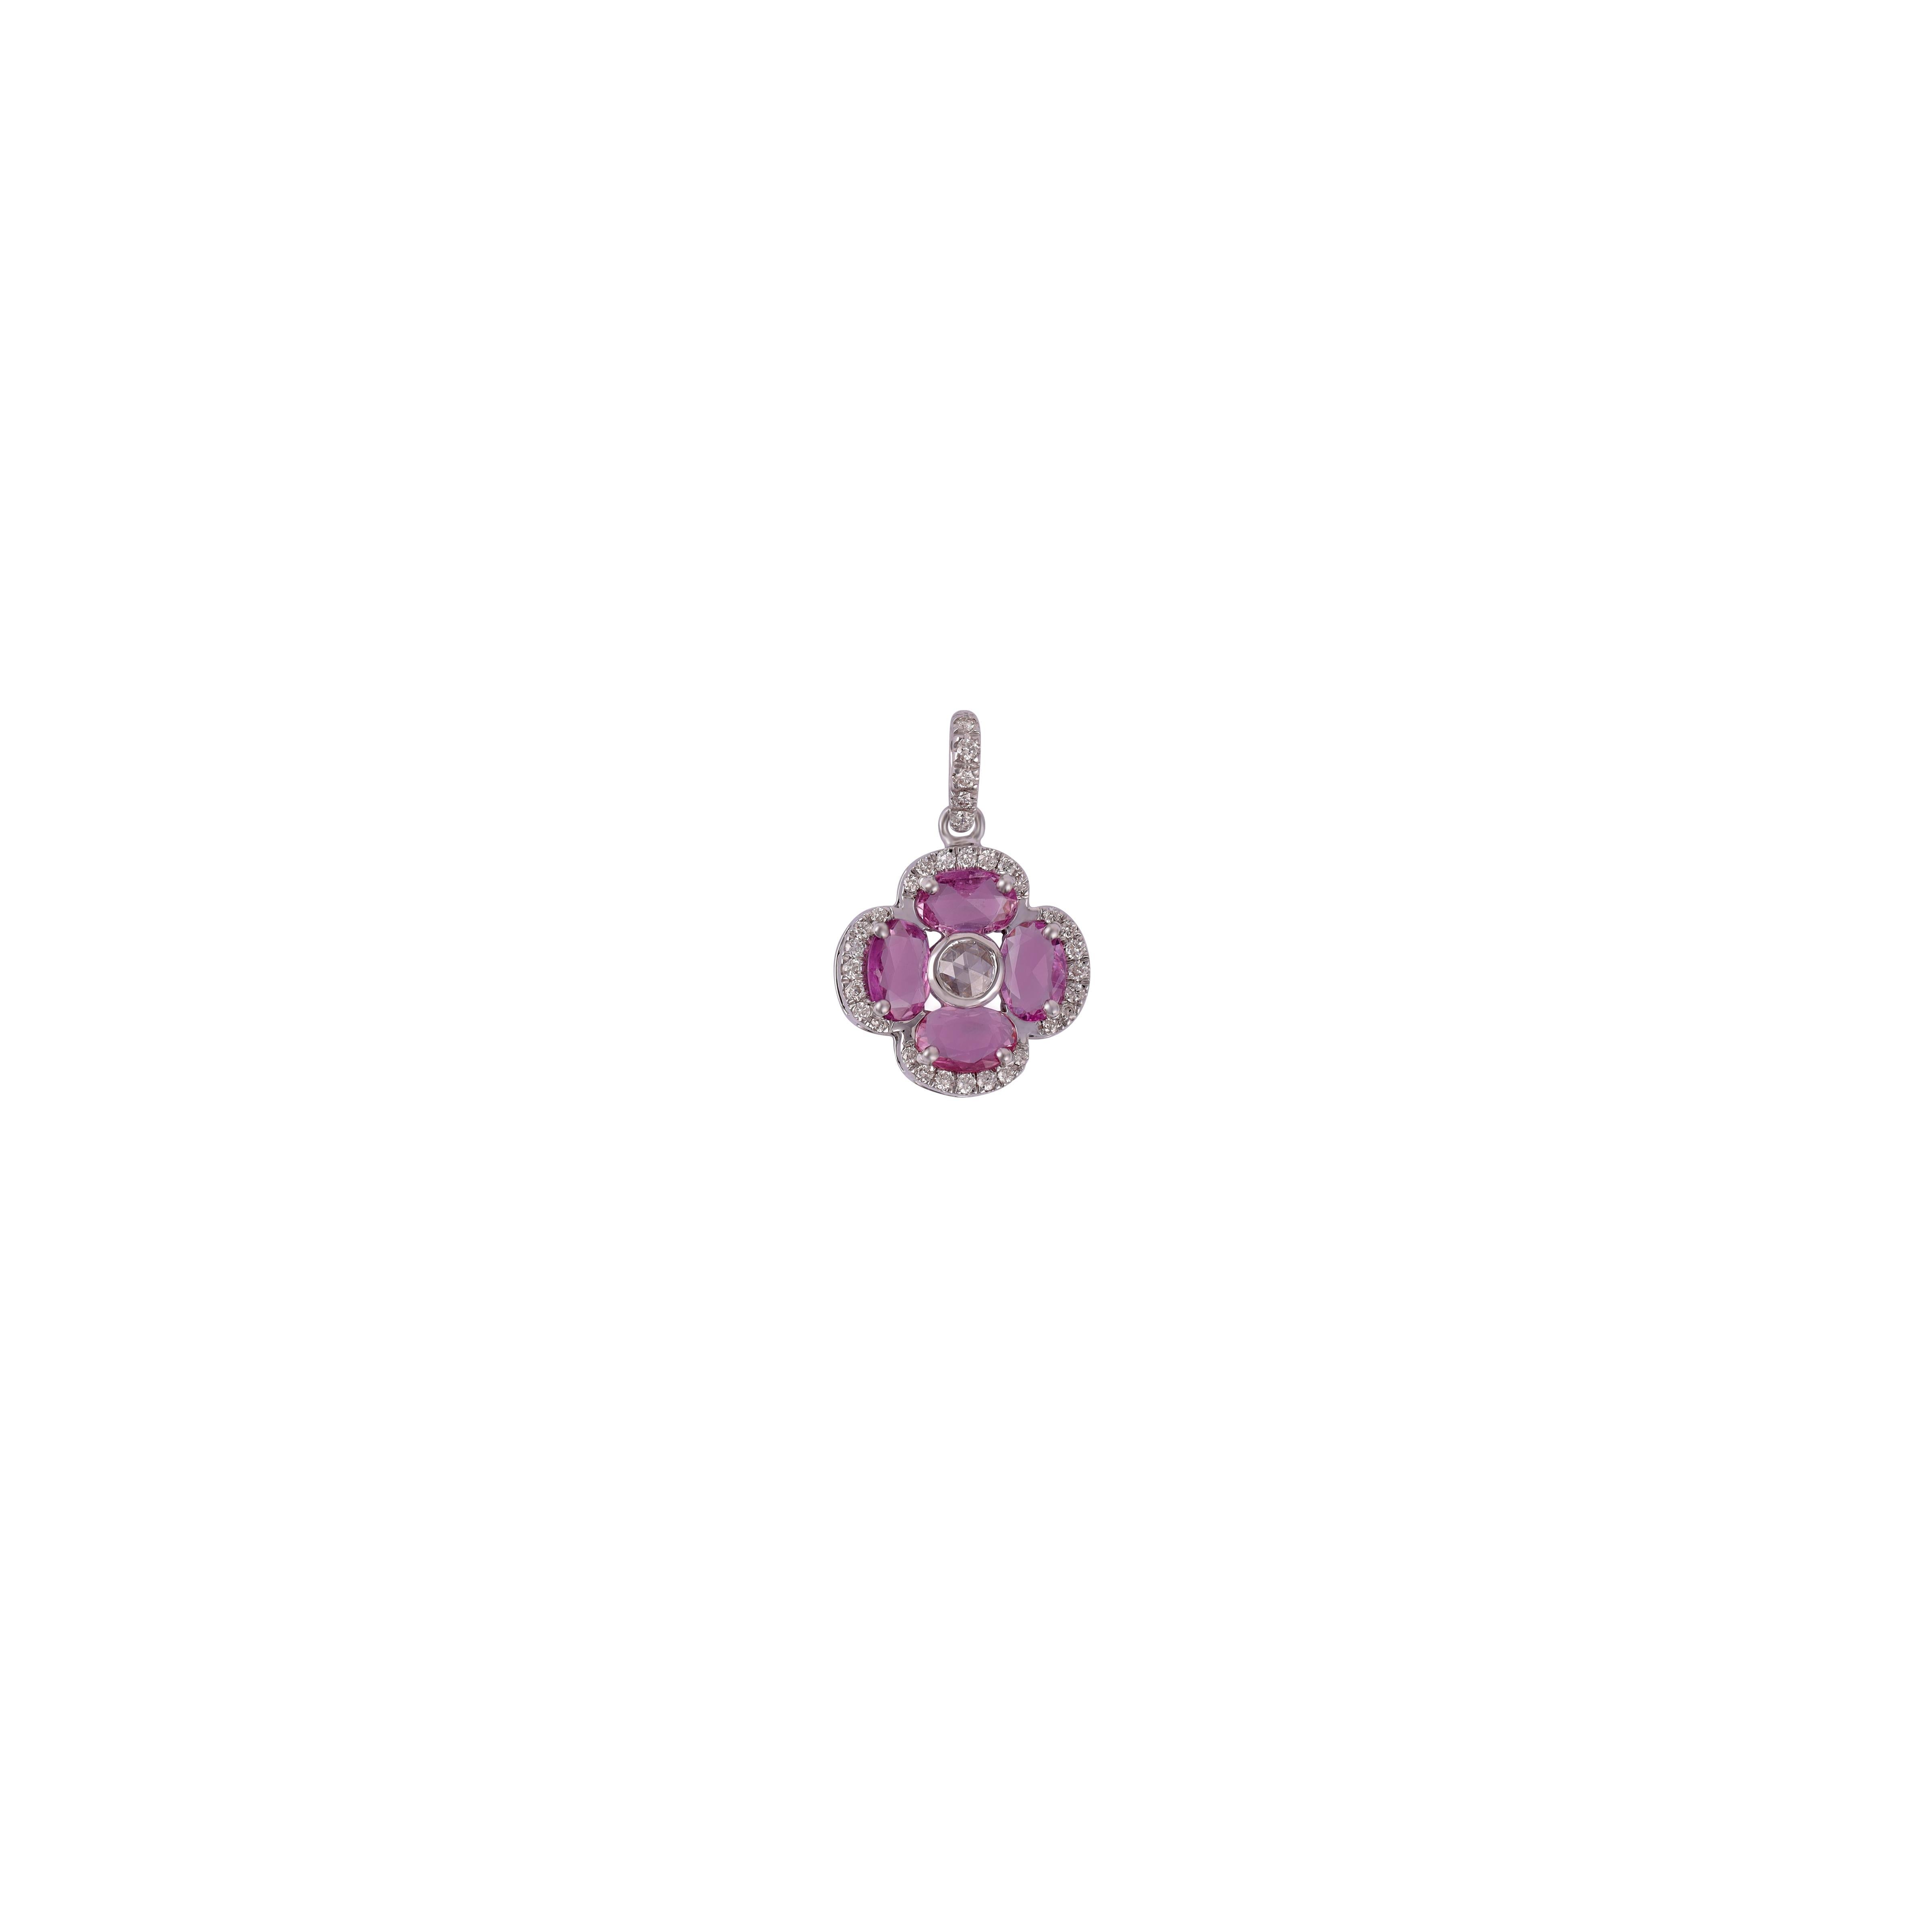 1.37 Carat Oval Cut Pink Sapphire Pendant Chain Necklace in 18K White Gold with Diamond
18kt Gold 2.58 grams
1 Rouse Cut Diamond 0.08Carat
33 Brilliant Round Cut Diamond 0.22 Carat

Custom Services
Resizing is available.
Request Customization